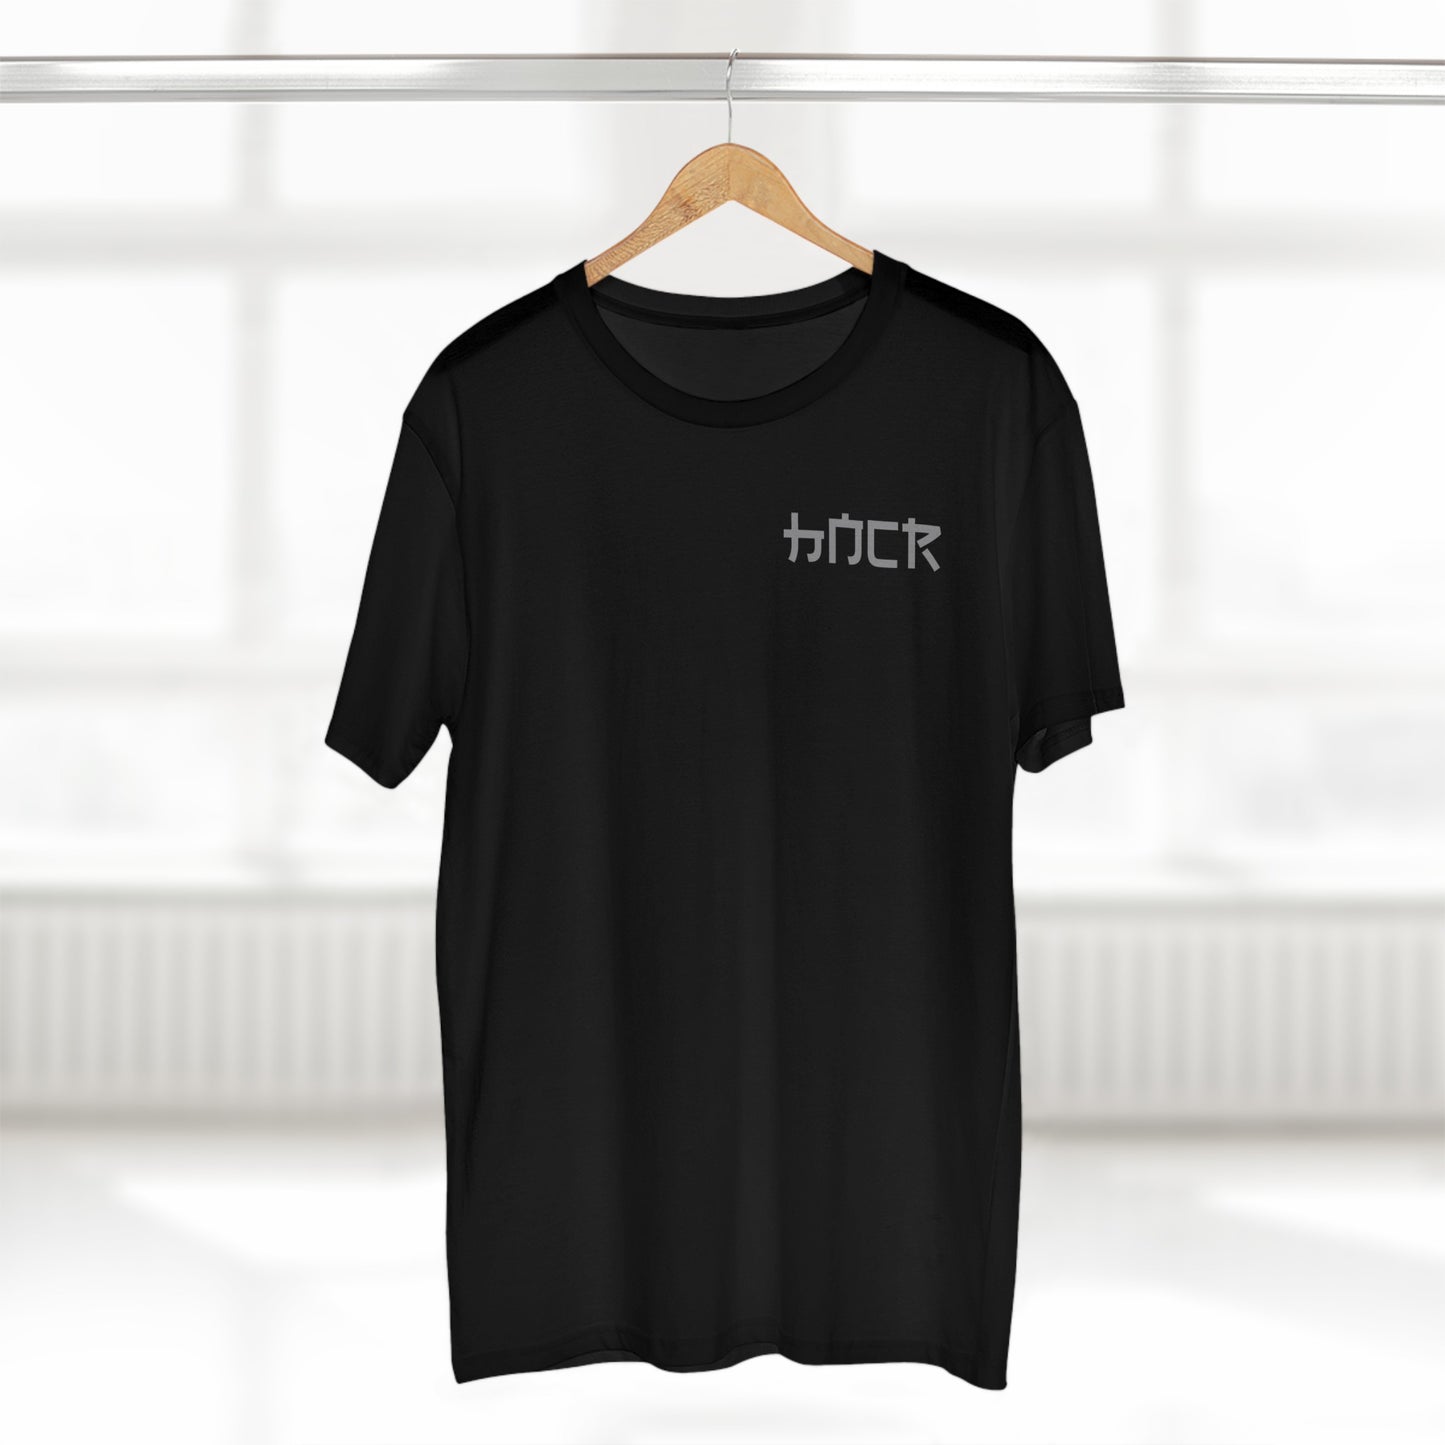 HNCR - AS Colour Men's Staple Tee - The Lost Long Weekend